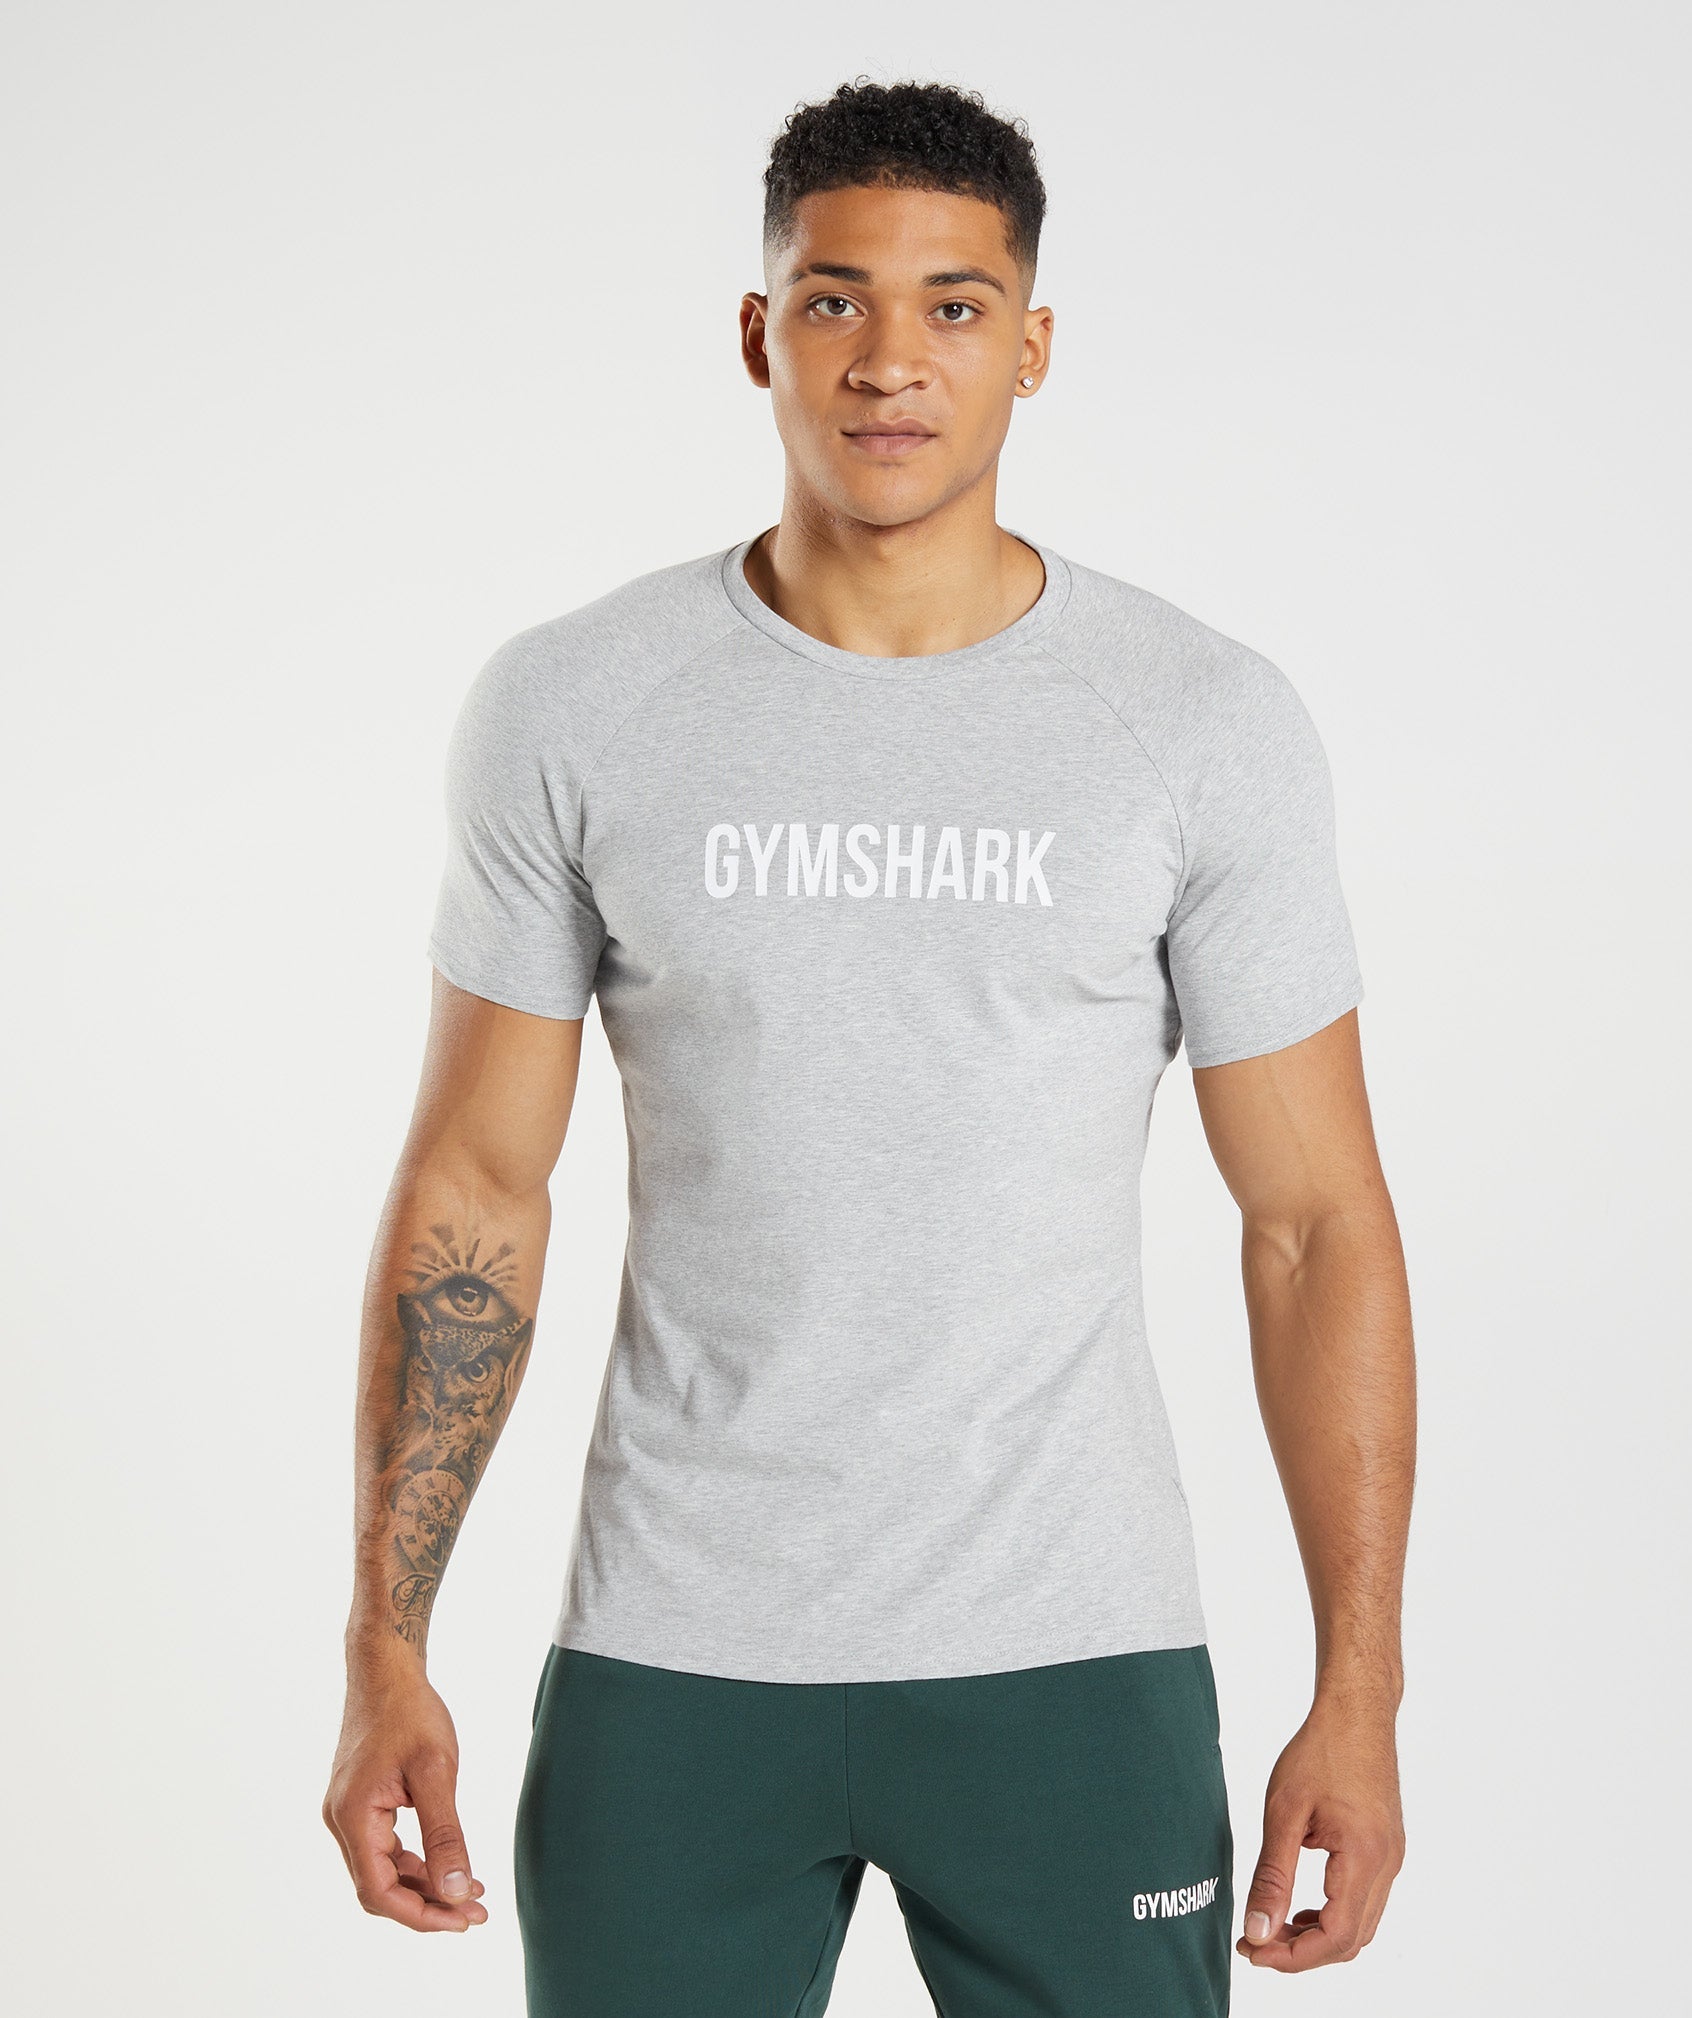 Apollo T-Shirt in Light Grey Marl - view 1